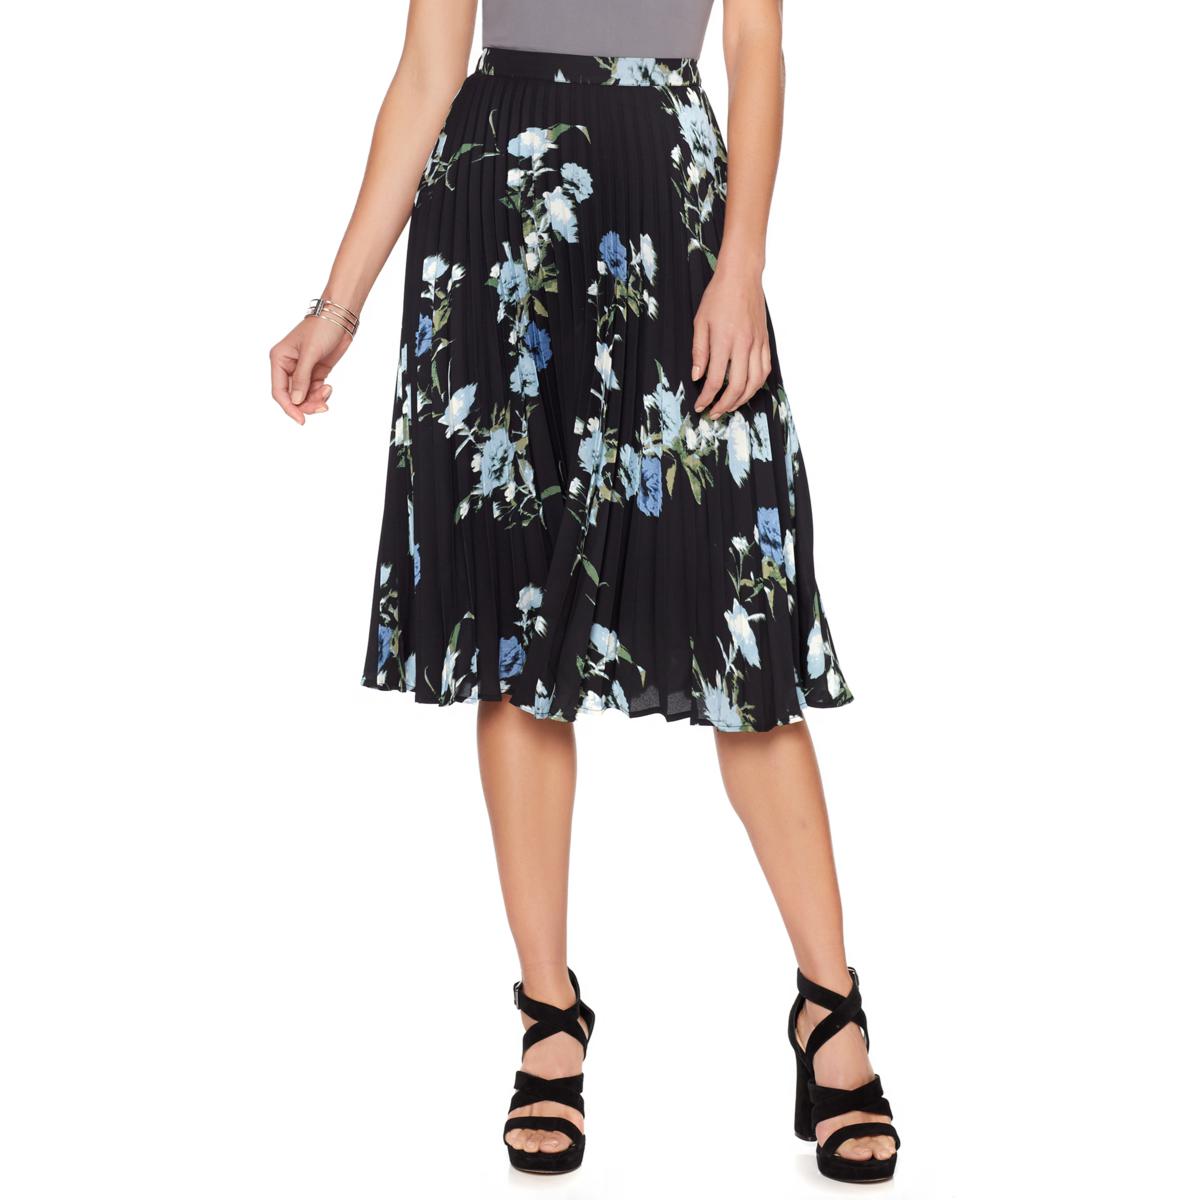 Blooming Style: 3 Ways To Wear Florals This Fall - HSN Blogs